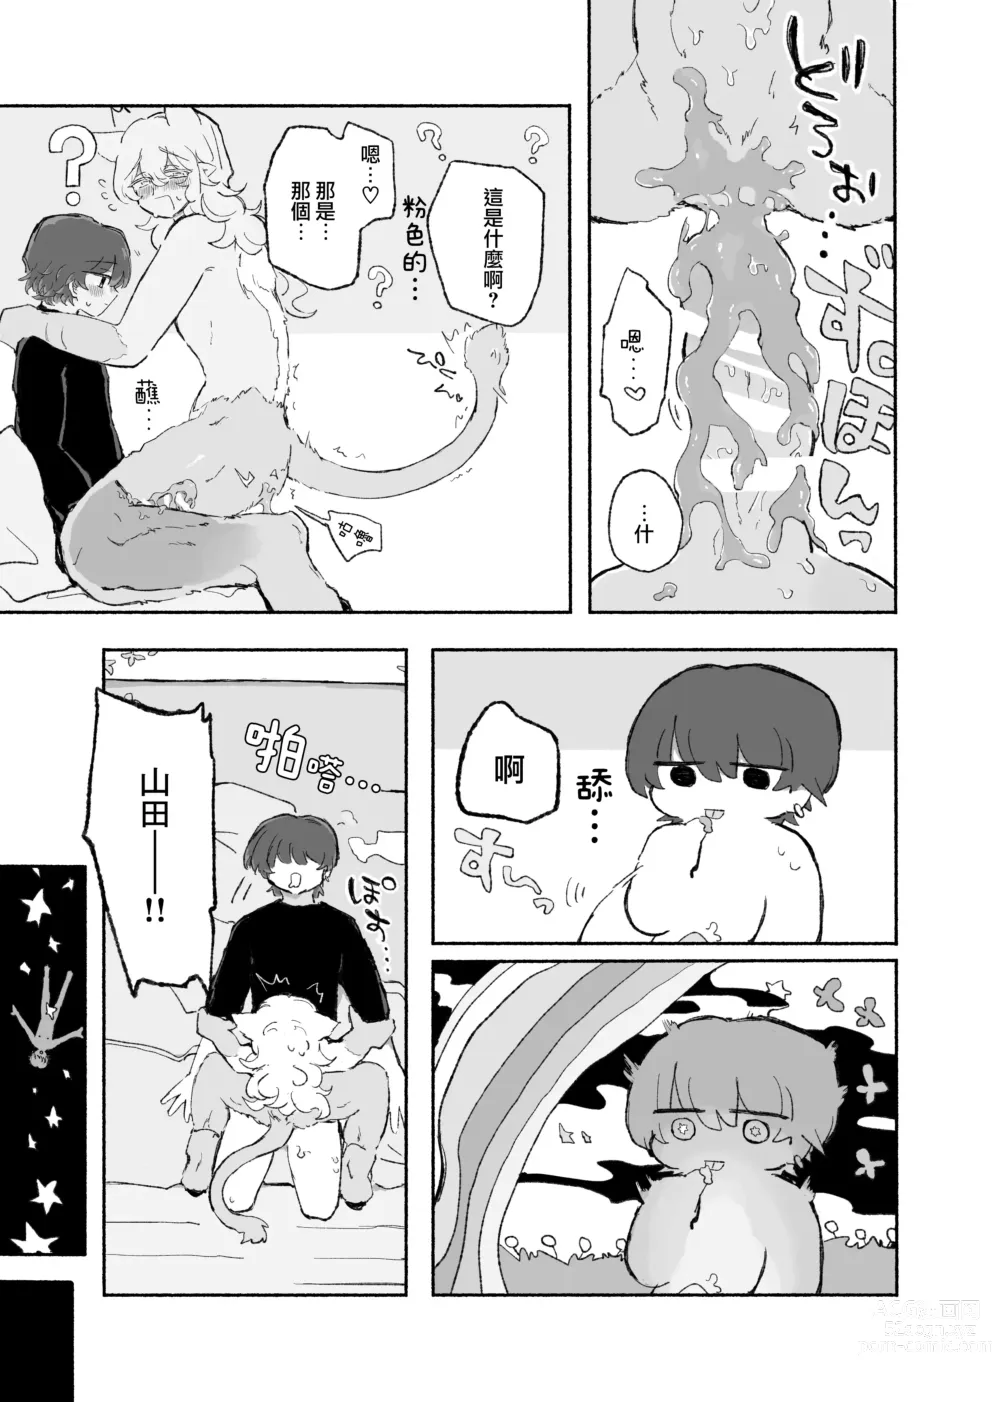 Page 23 of doujinshi 零之惡魔